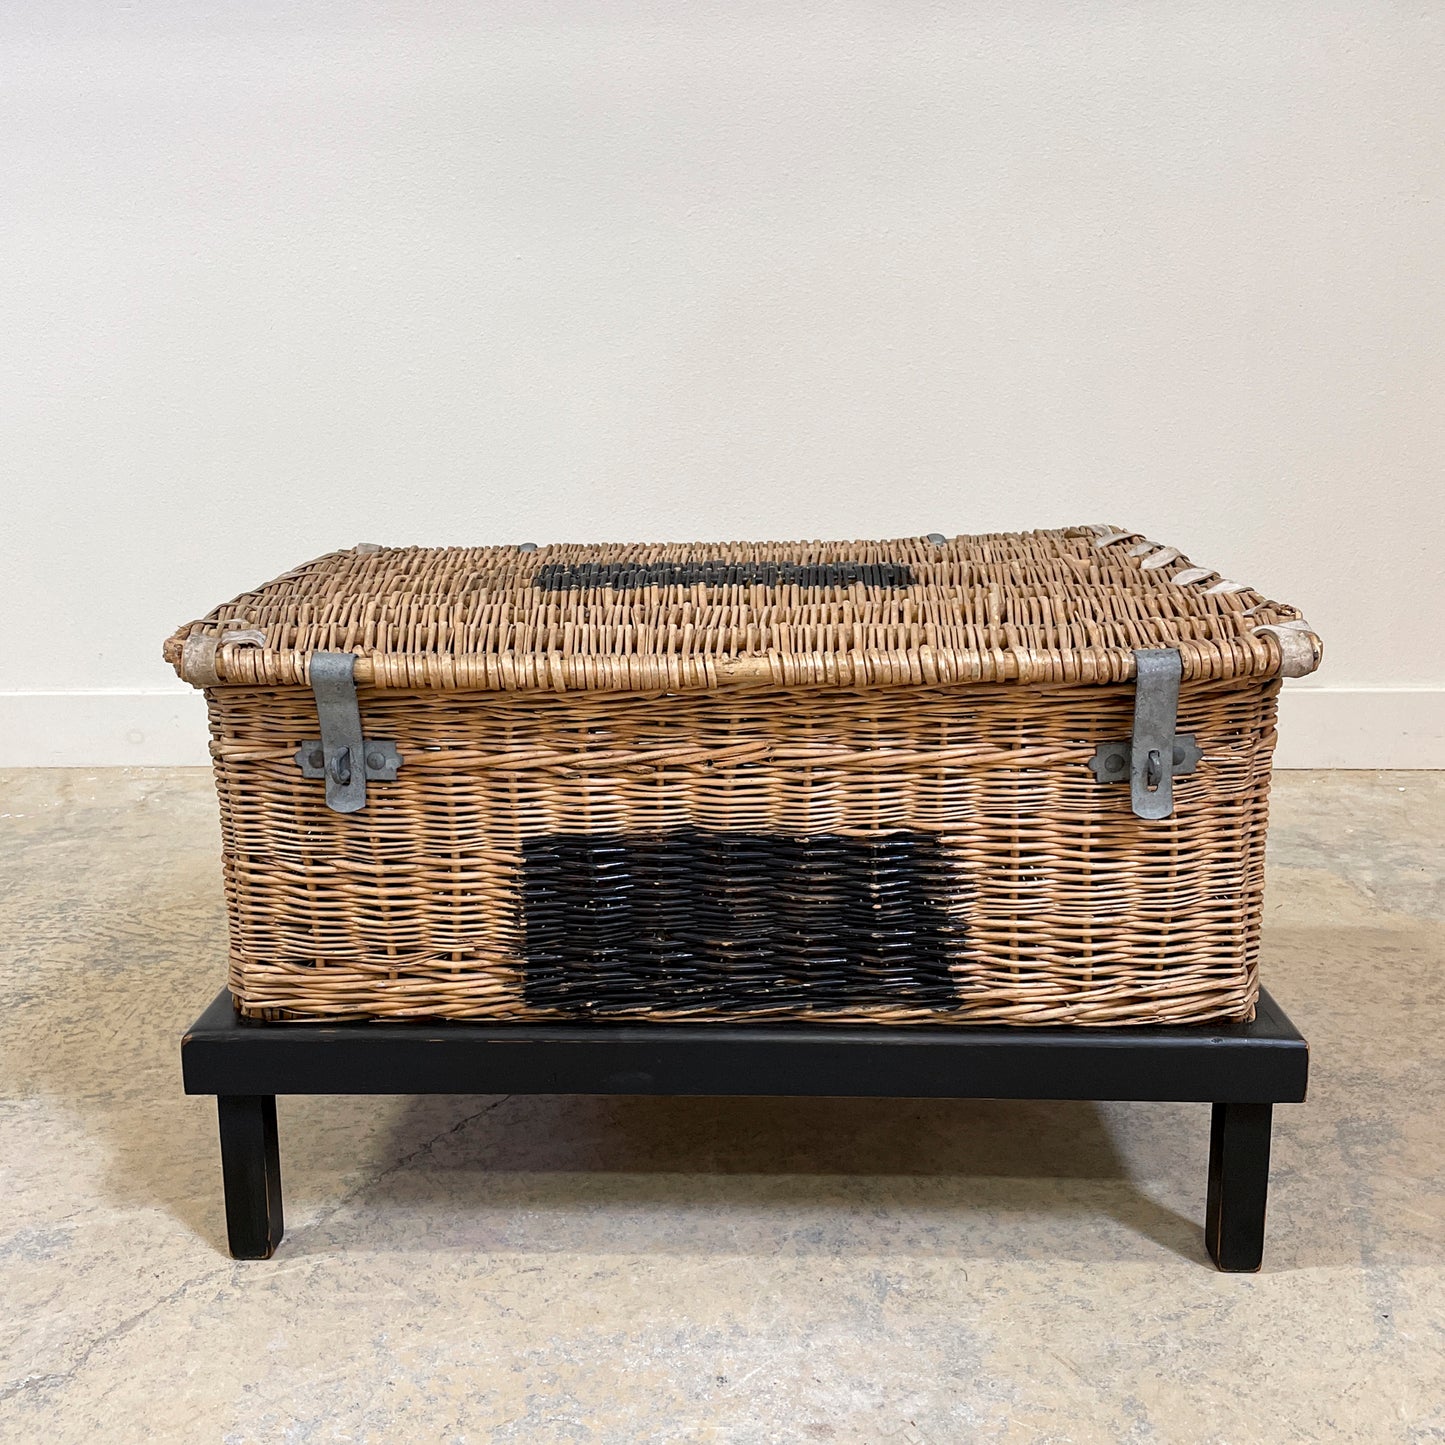 Travel Basket on Stand